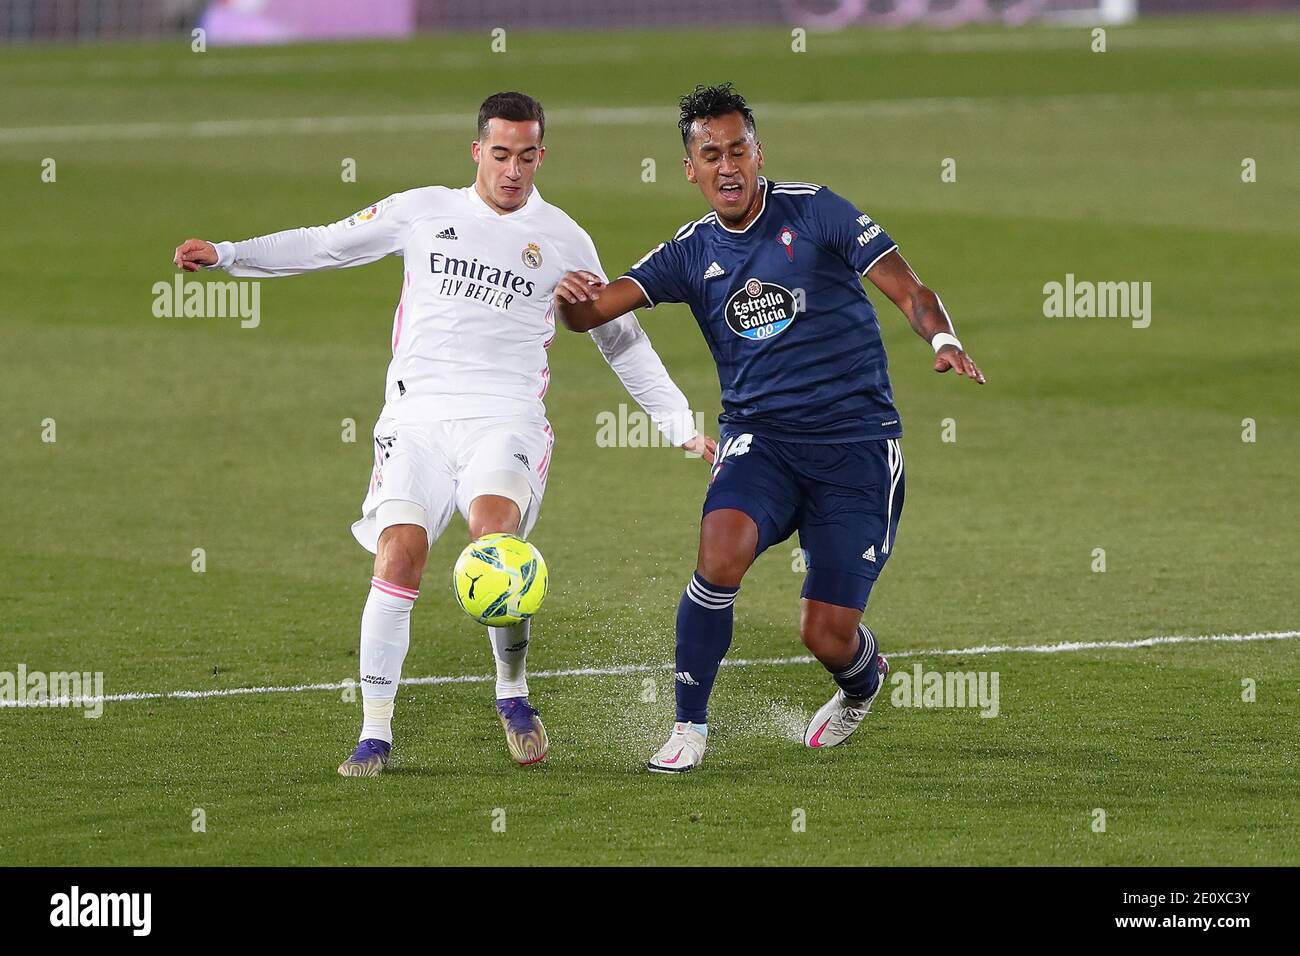 Madrid, Spain. 2nd Jan, 2021. Real Madrid's Lucas Vazquez (L) vies with Celta Vigo's Renato Tapia during a Spanish league football match between Real Madrid and Celta Vigo in Madrid, Spain, on Jan. 2, 2021. Credit: Edward F. Peters/Xinhua/Alamy Live News Stock Photo